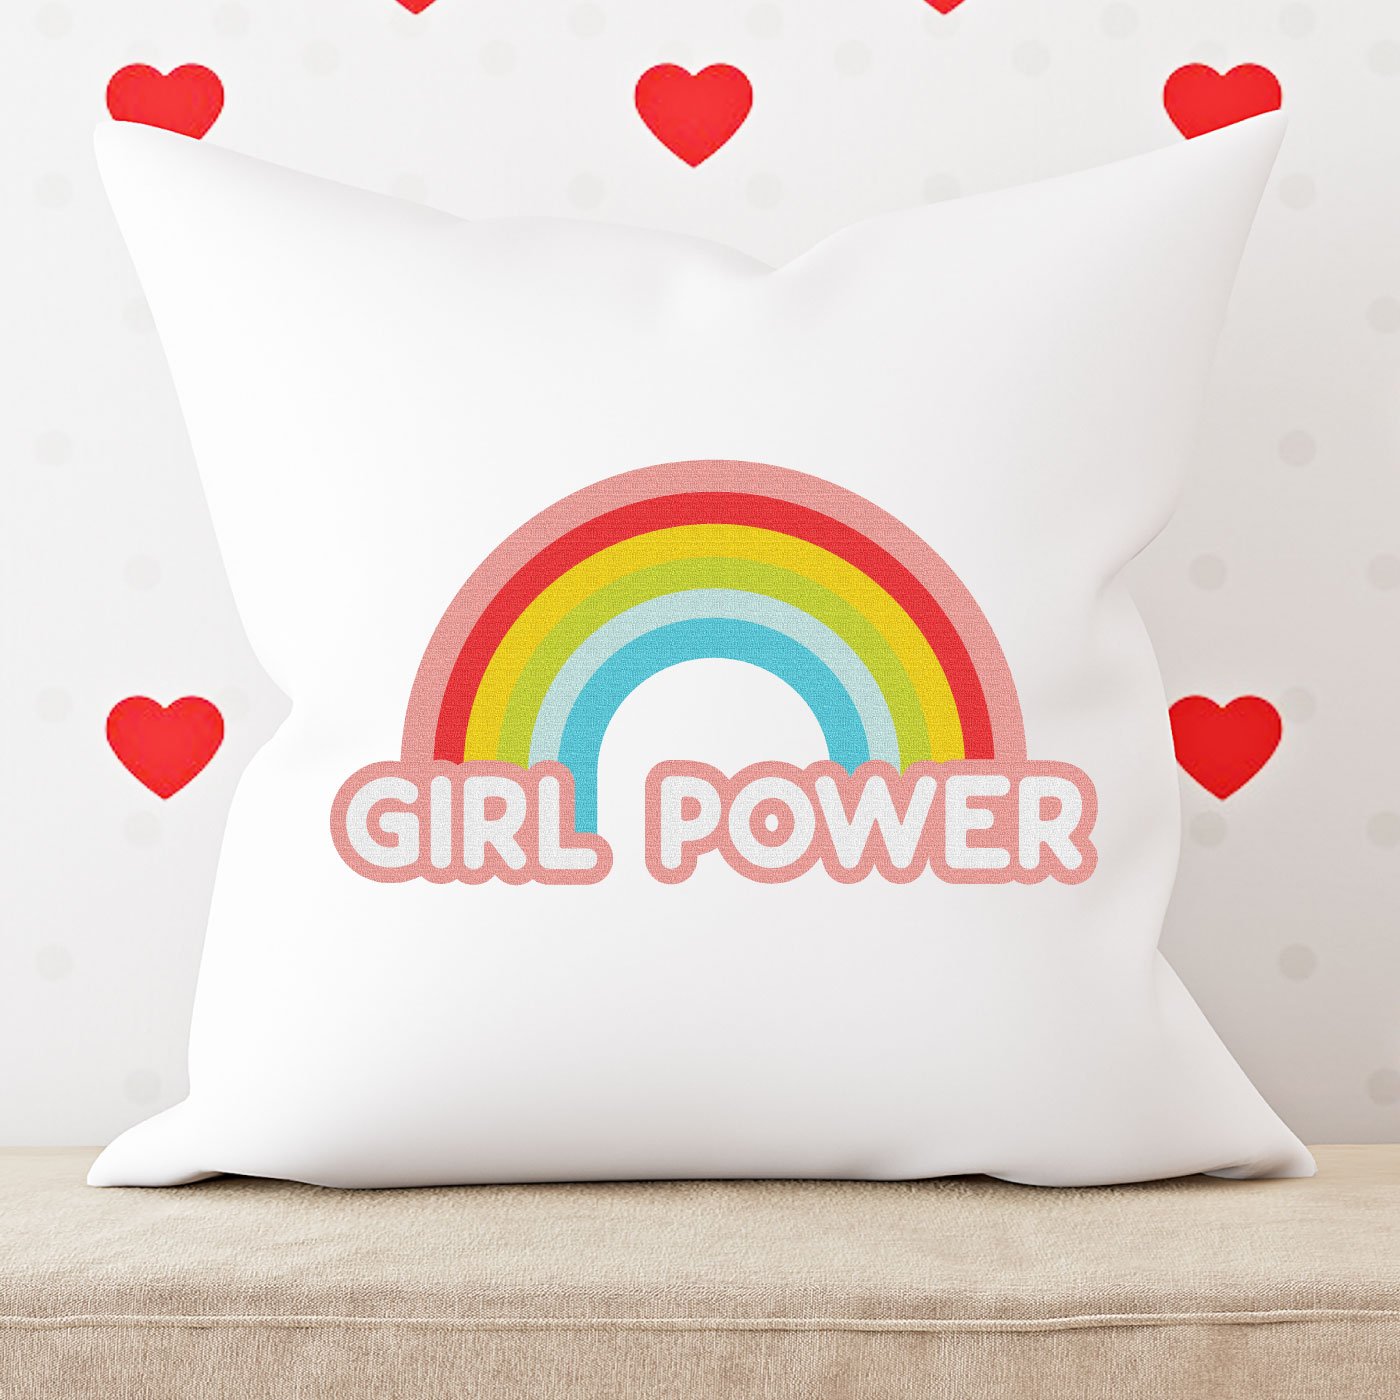 Girl Power image on pillow with heart wallpaper